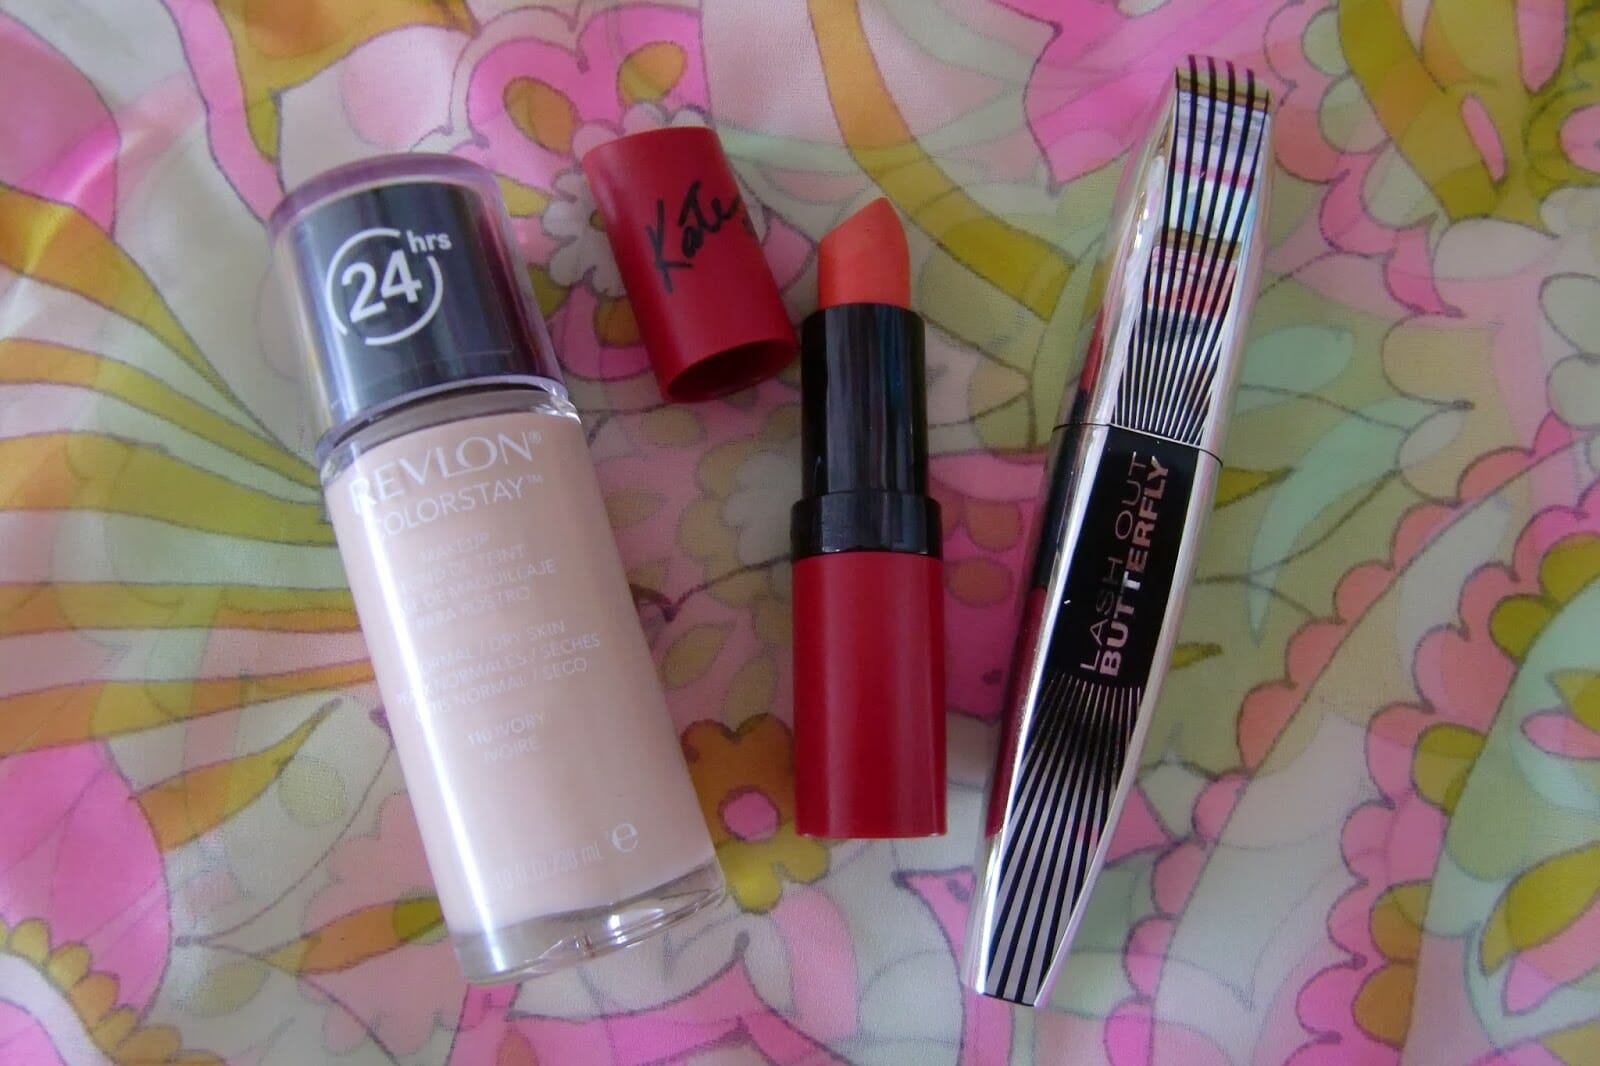 Face, Eye and Lip Favourites!